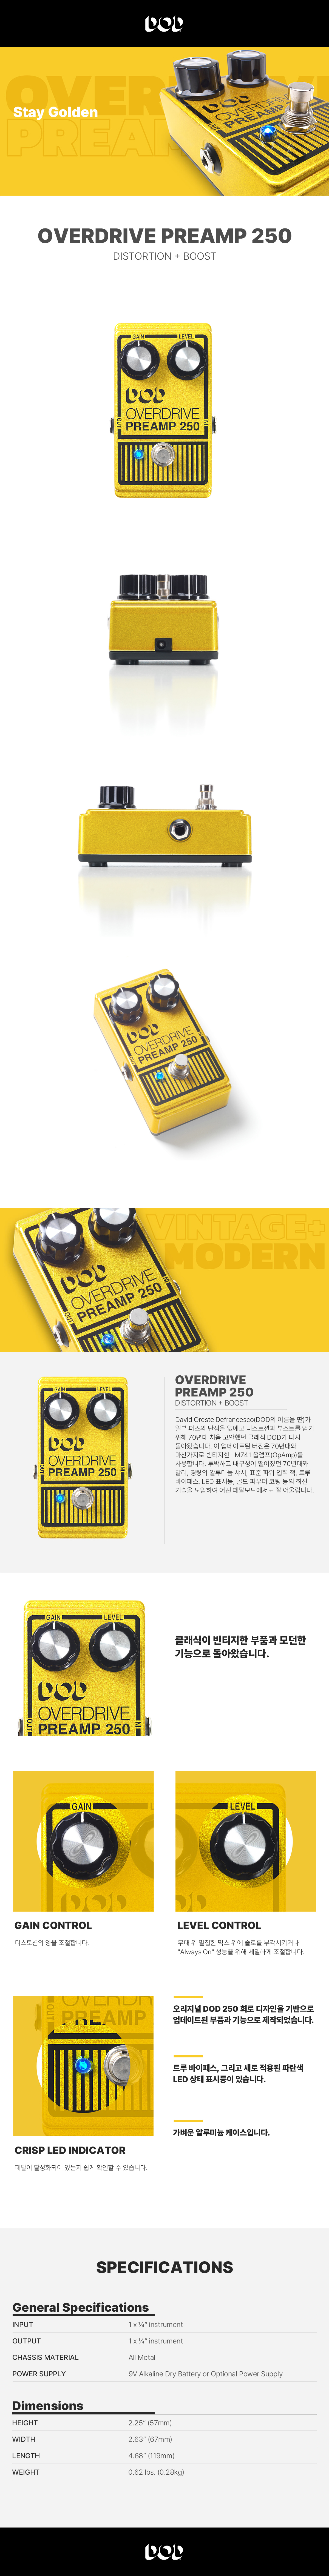 Overdrive_Preamp_250_Product_page1200px_131543.jpg